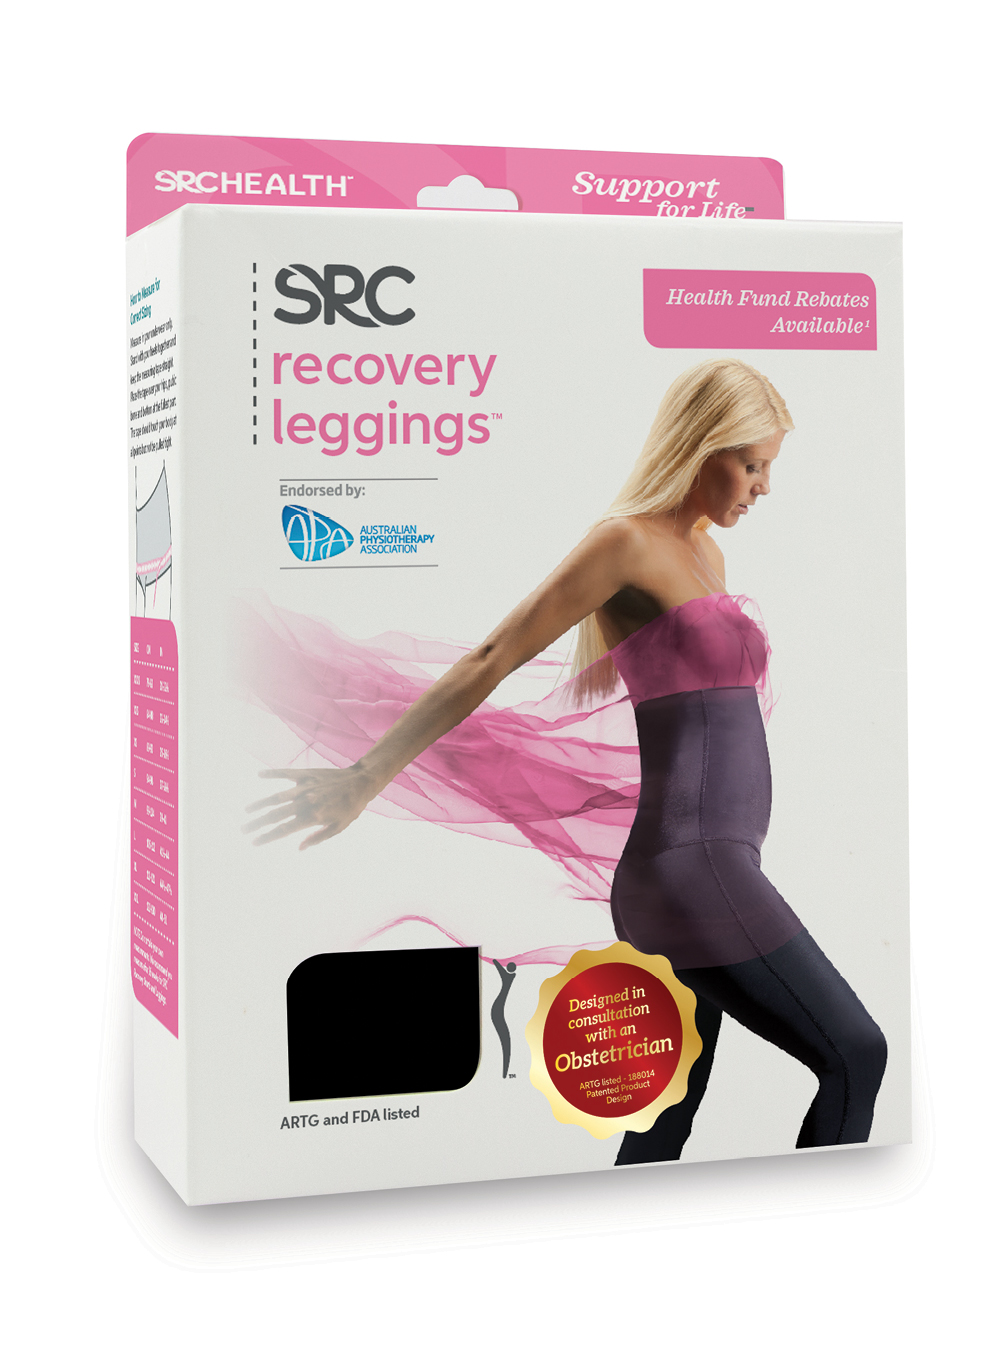 SRC SPORTS LEGGINGS - Auckland Physiotherapy